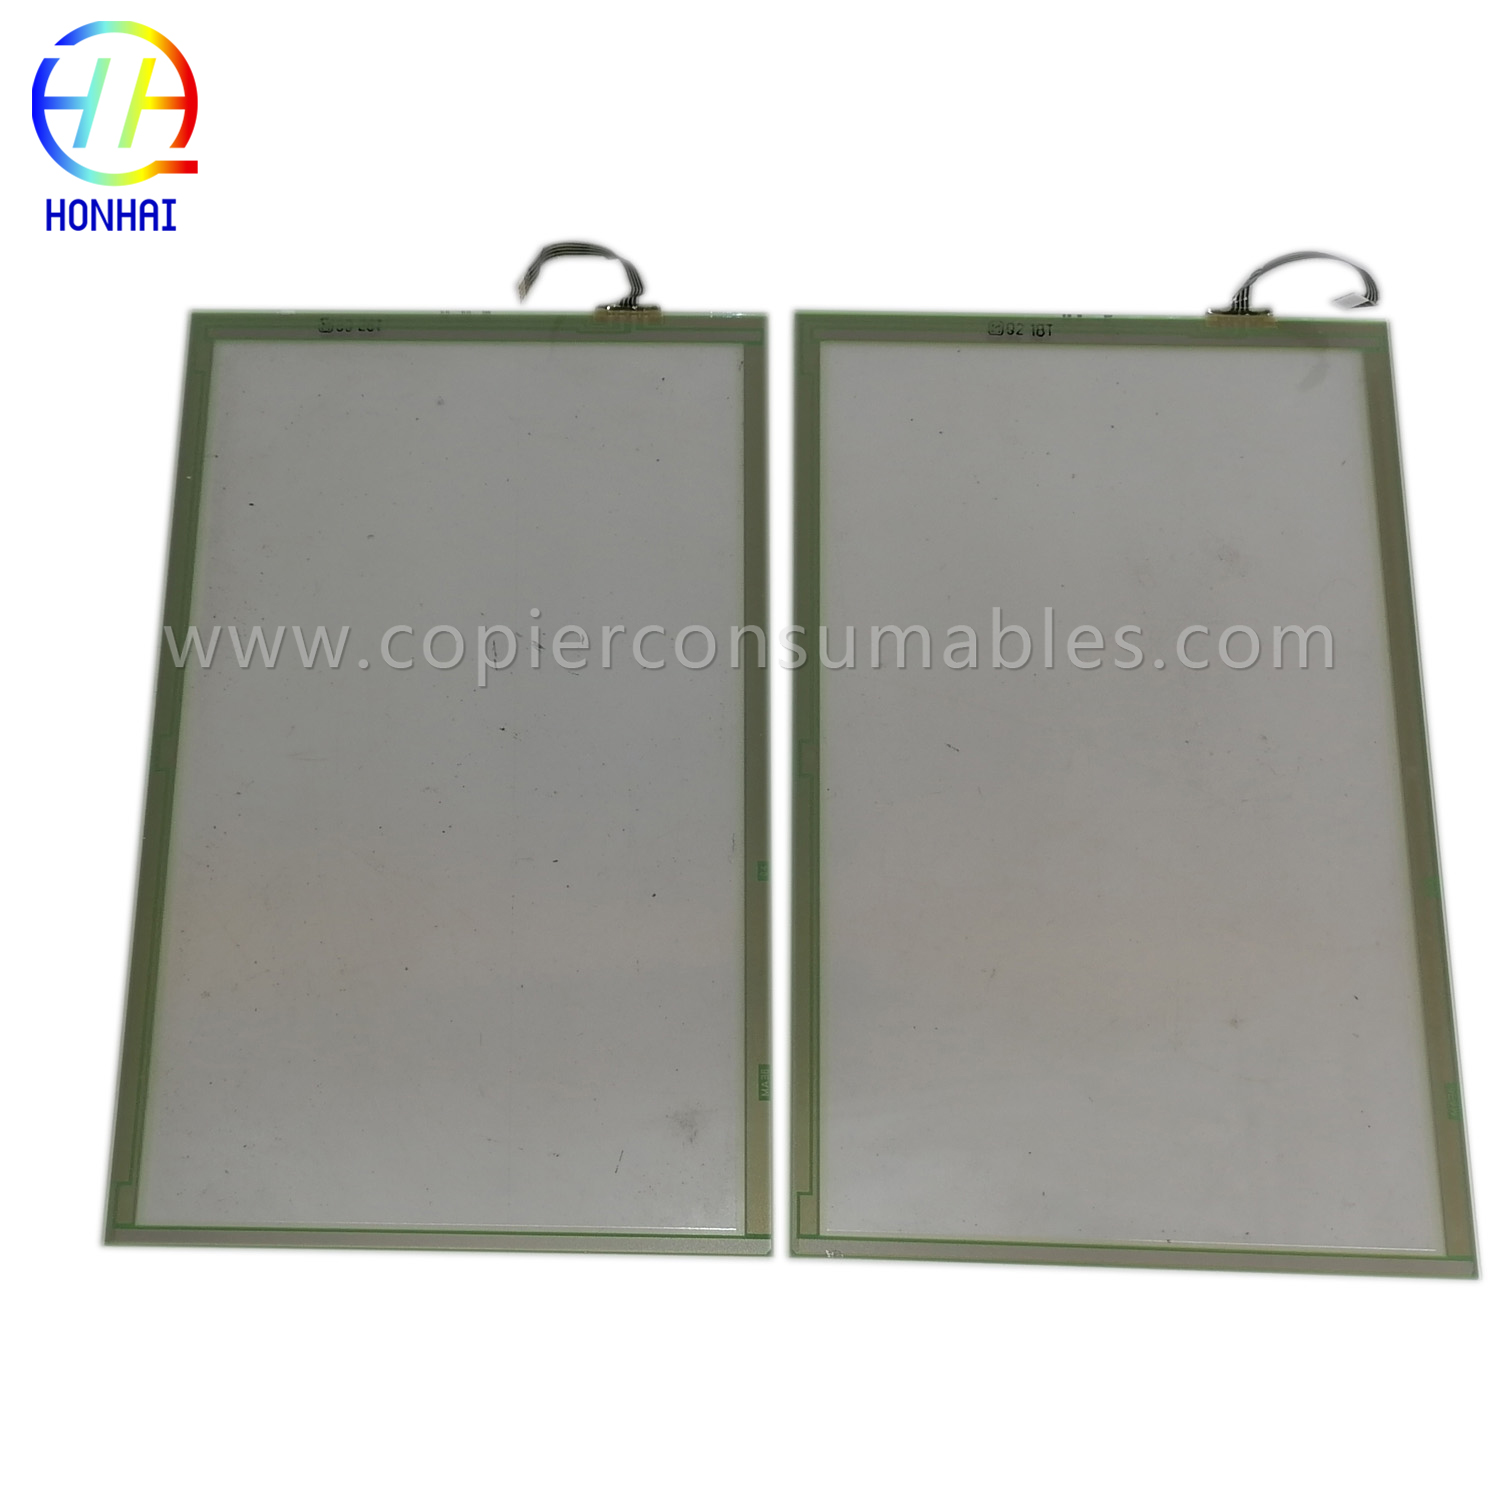 Manufacturer for Requil Toner - Touch Panel for Ricoh MP 4000B 5000B 4001 5001 4002 5002 4000 1035 1045 3010 3035 3045 – HONHAI